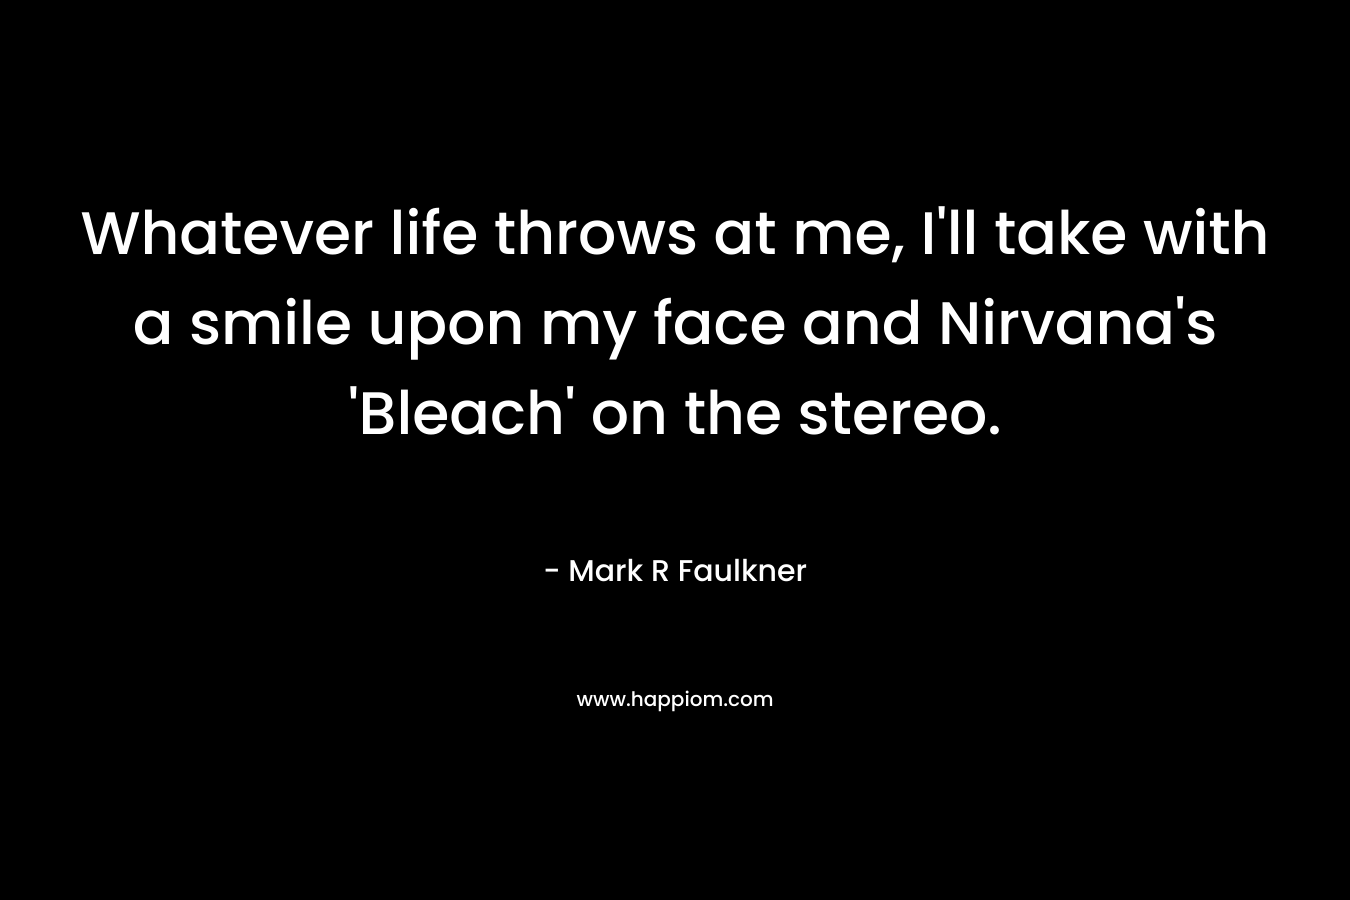 Whatever life throws at me, I’ll take with a smile upon my face and Nirvana’s ‘Bleach’ on the stereo. – Mark R Faulkner